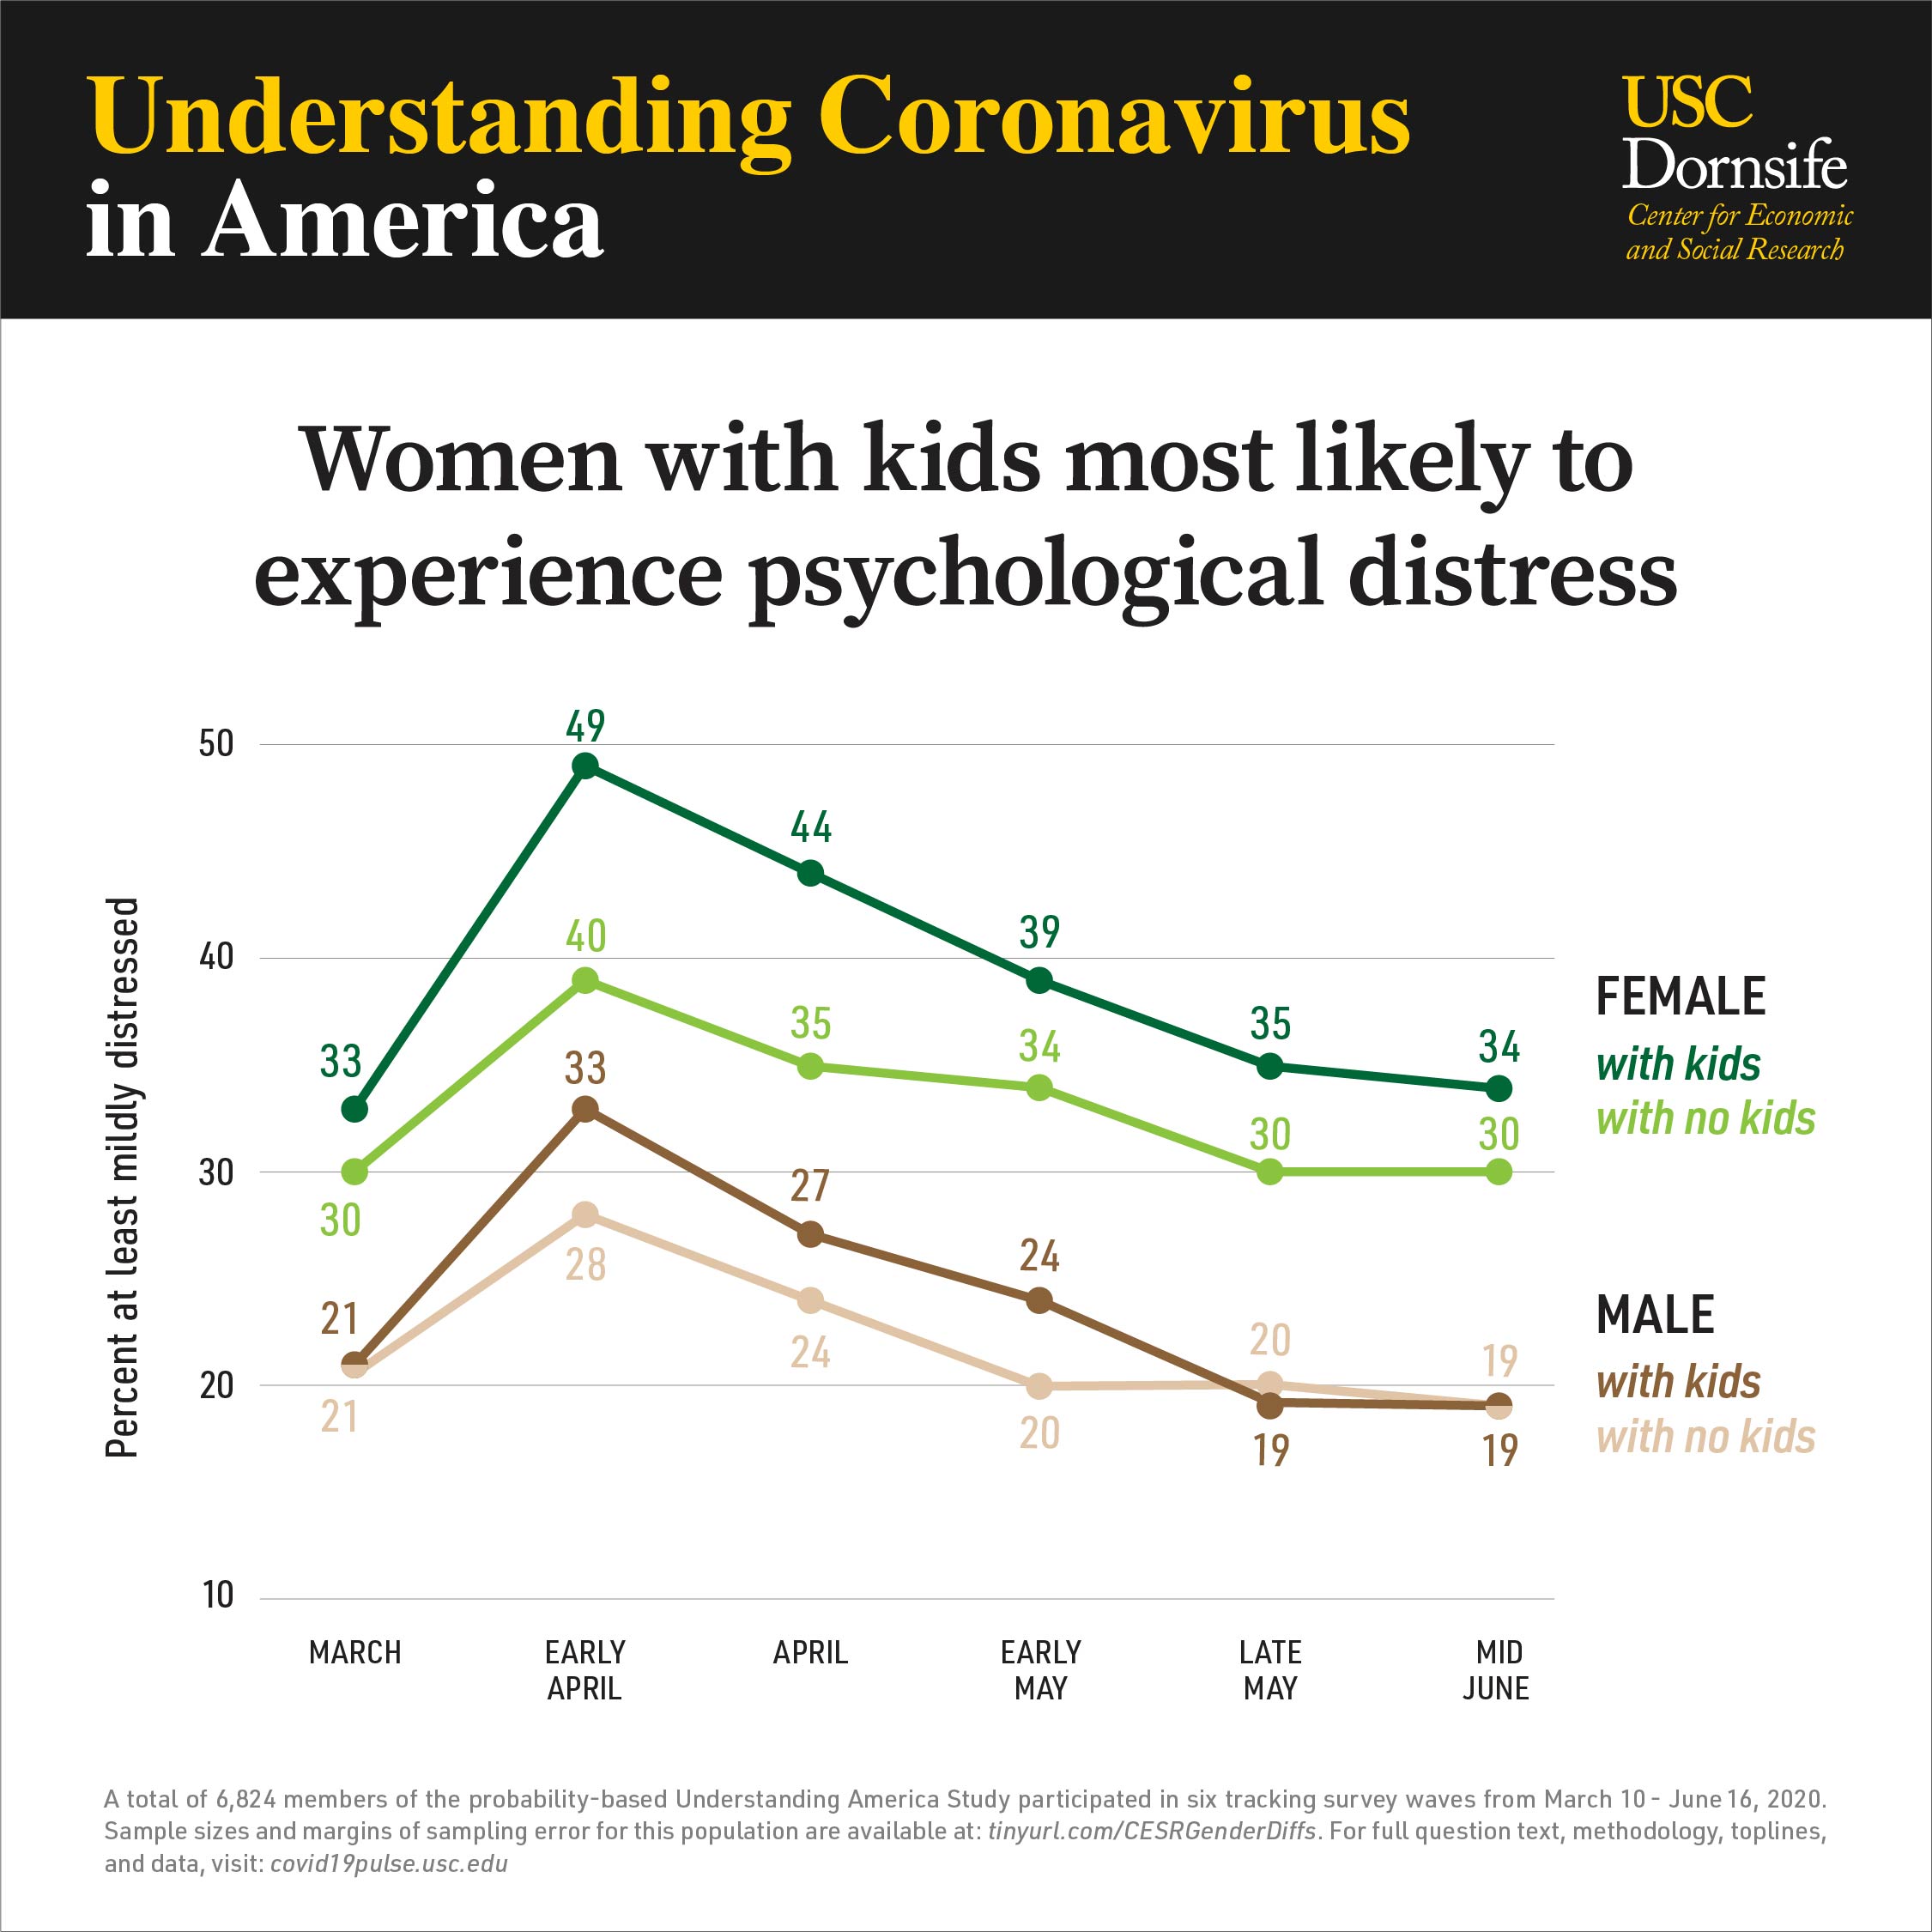 Chart compares psychological distress among women and men with and without kids from March to mid-June.